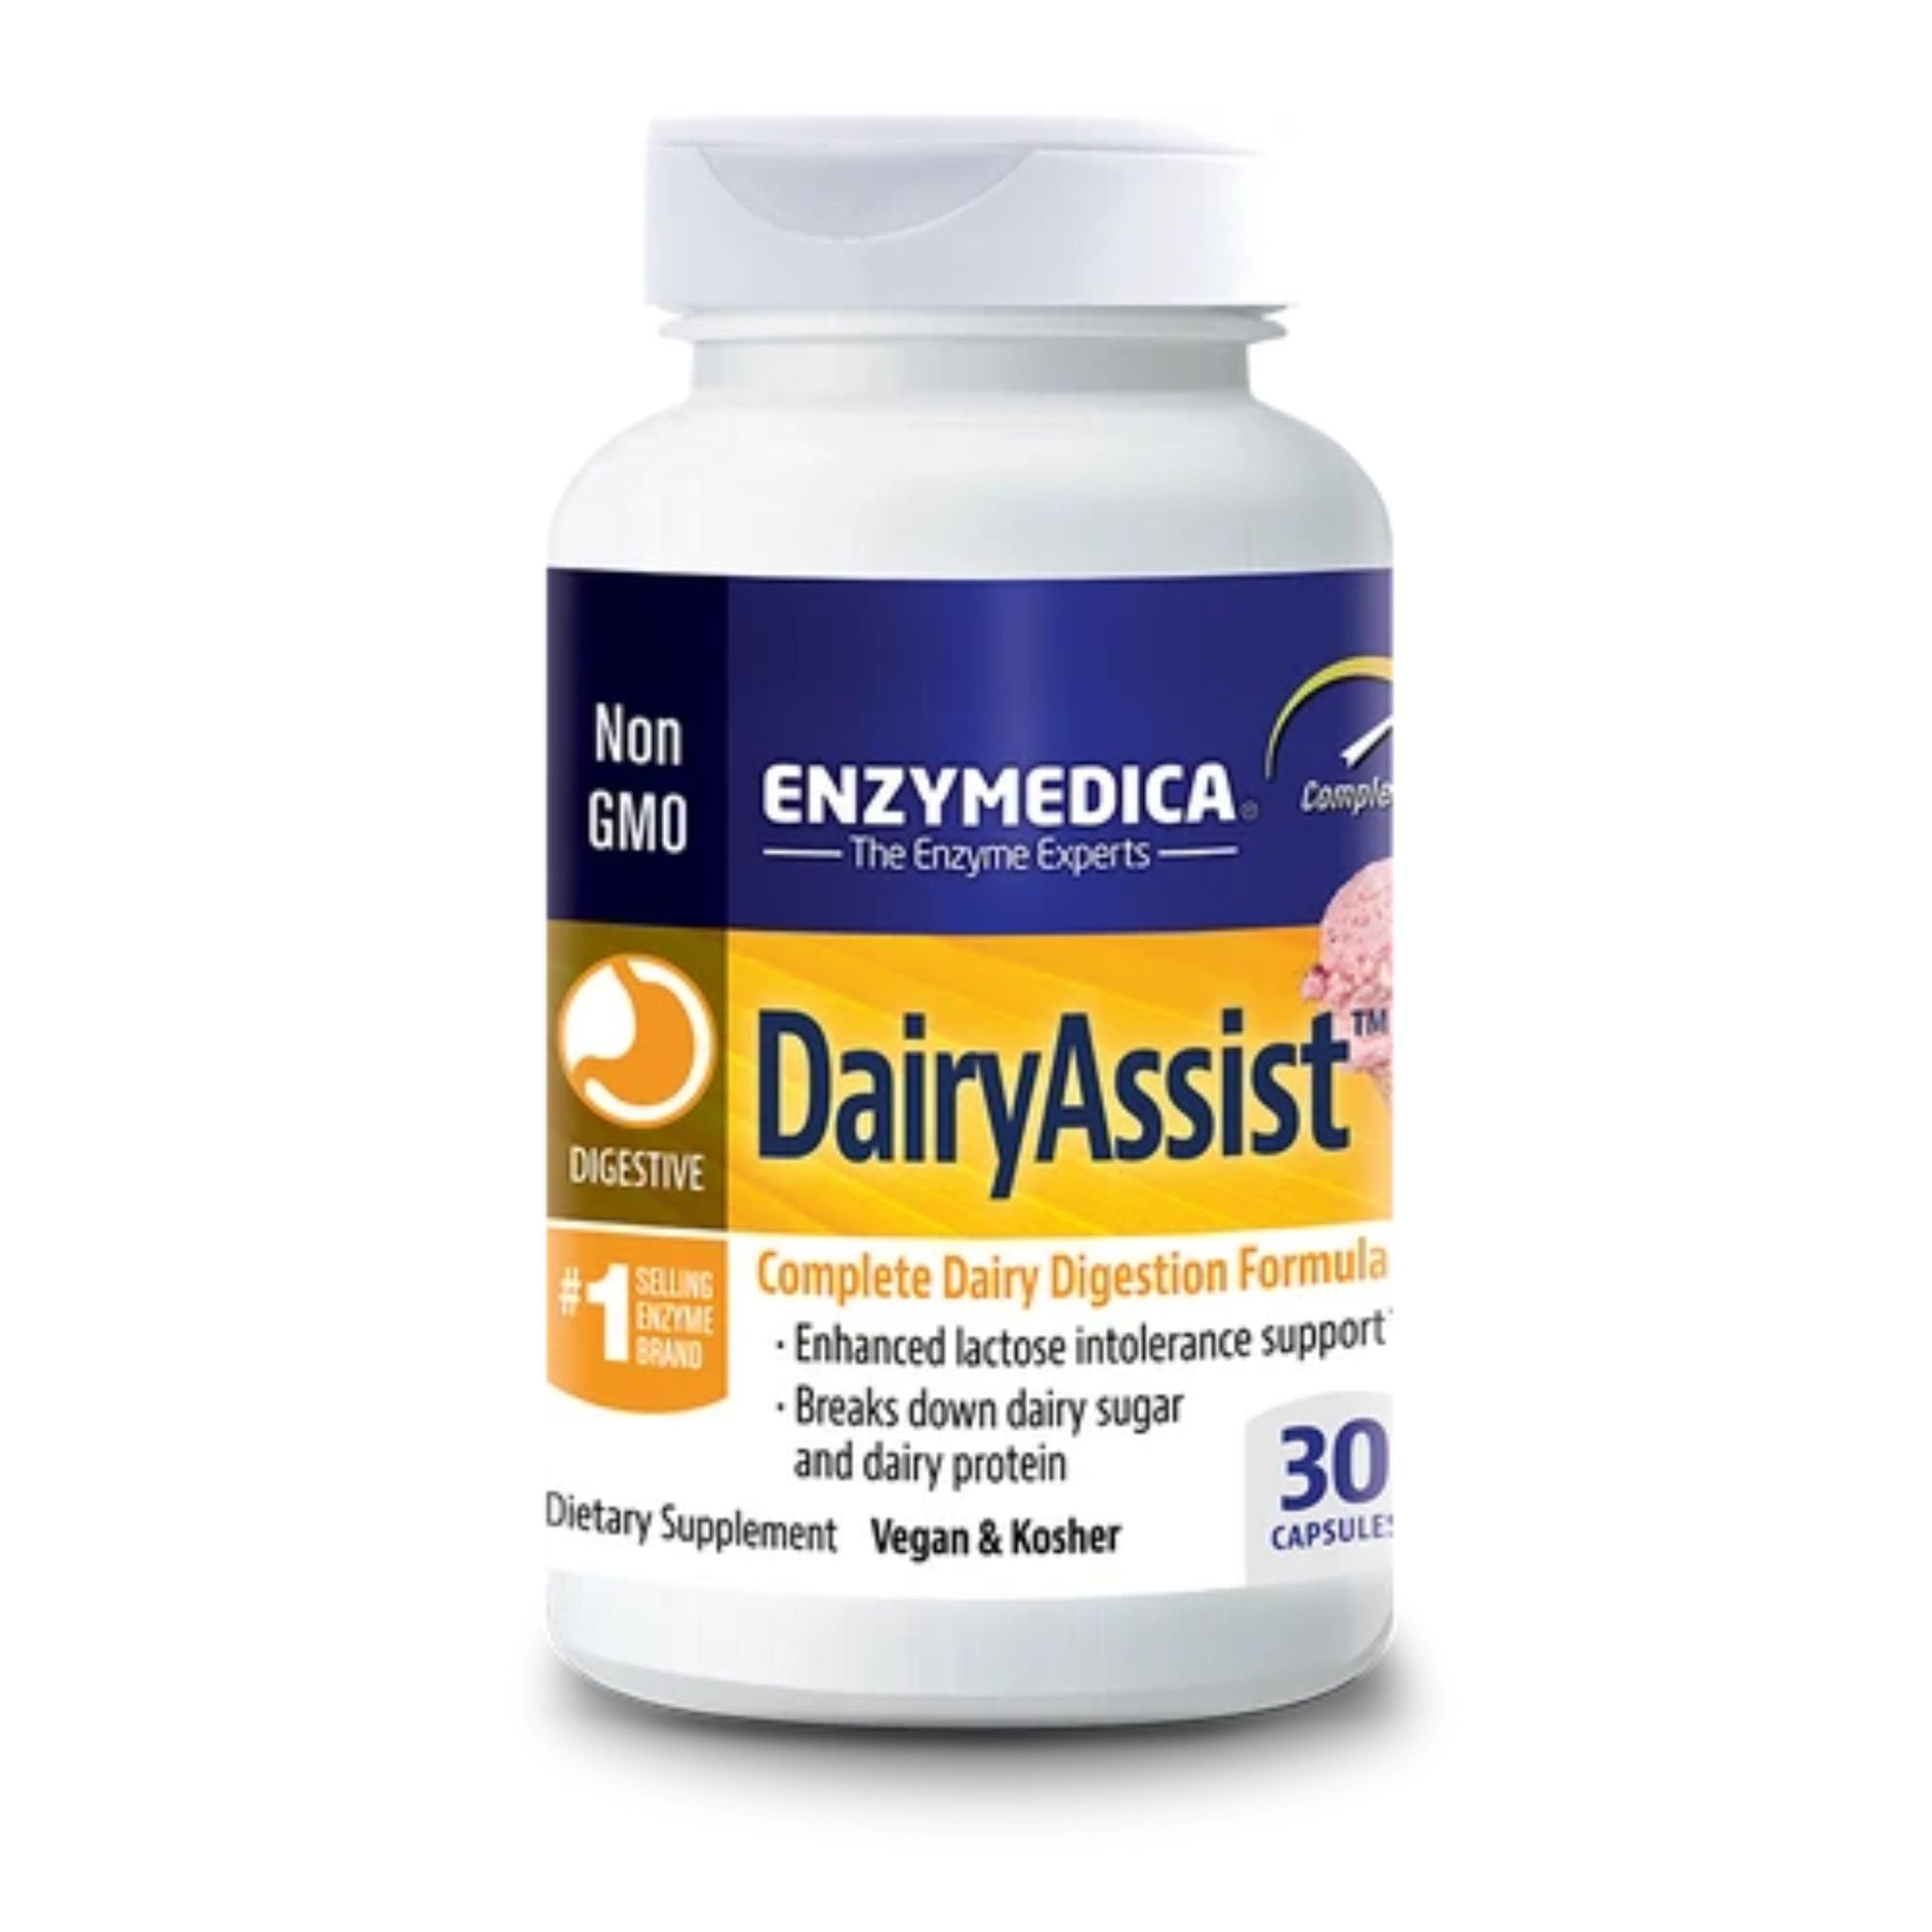 Bottle of Enzymedica's Dairy Assist 30 capsules - a complete dairy digestion formula 